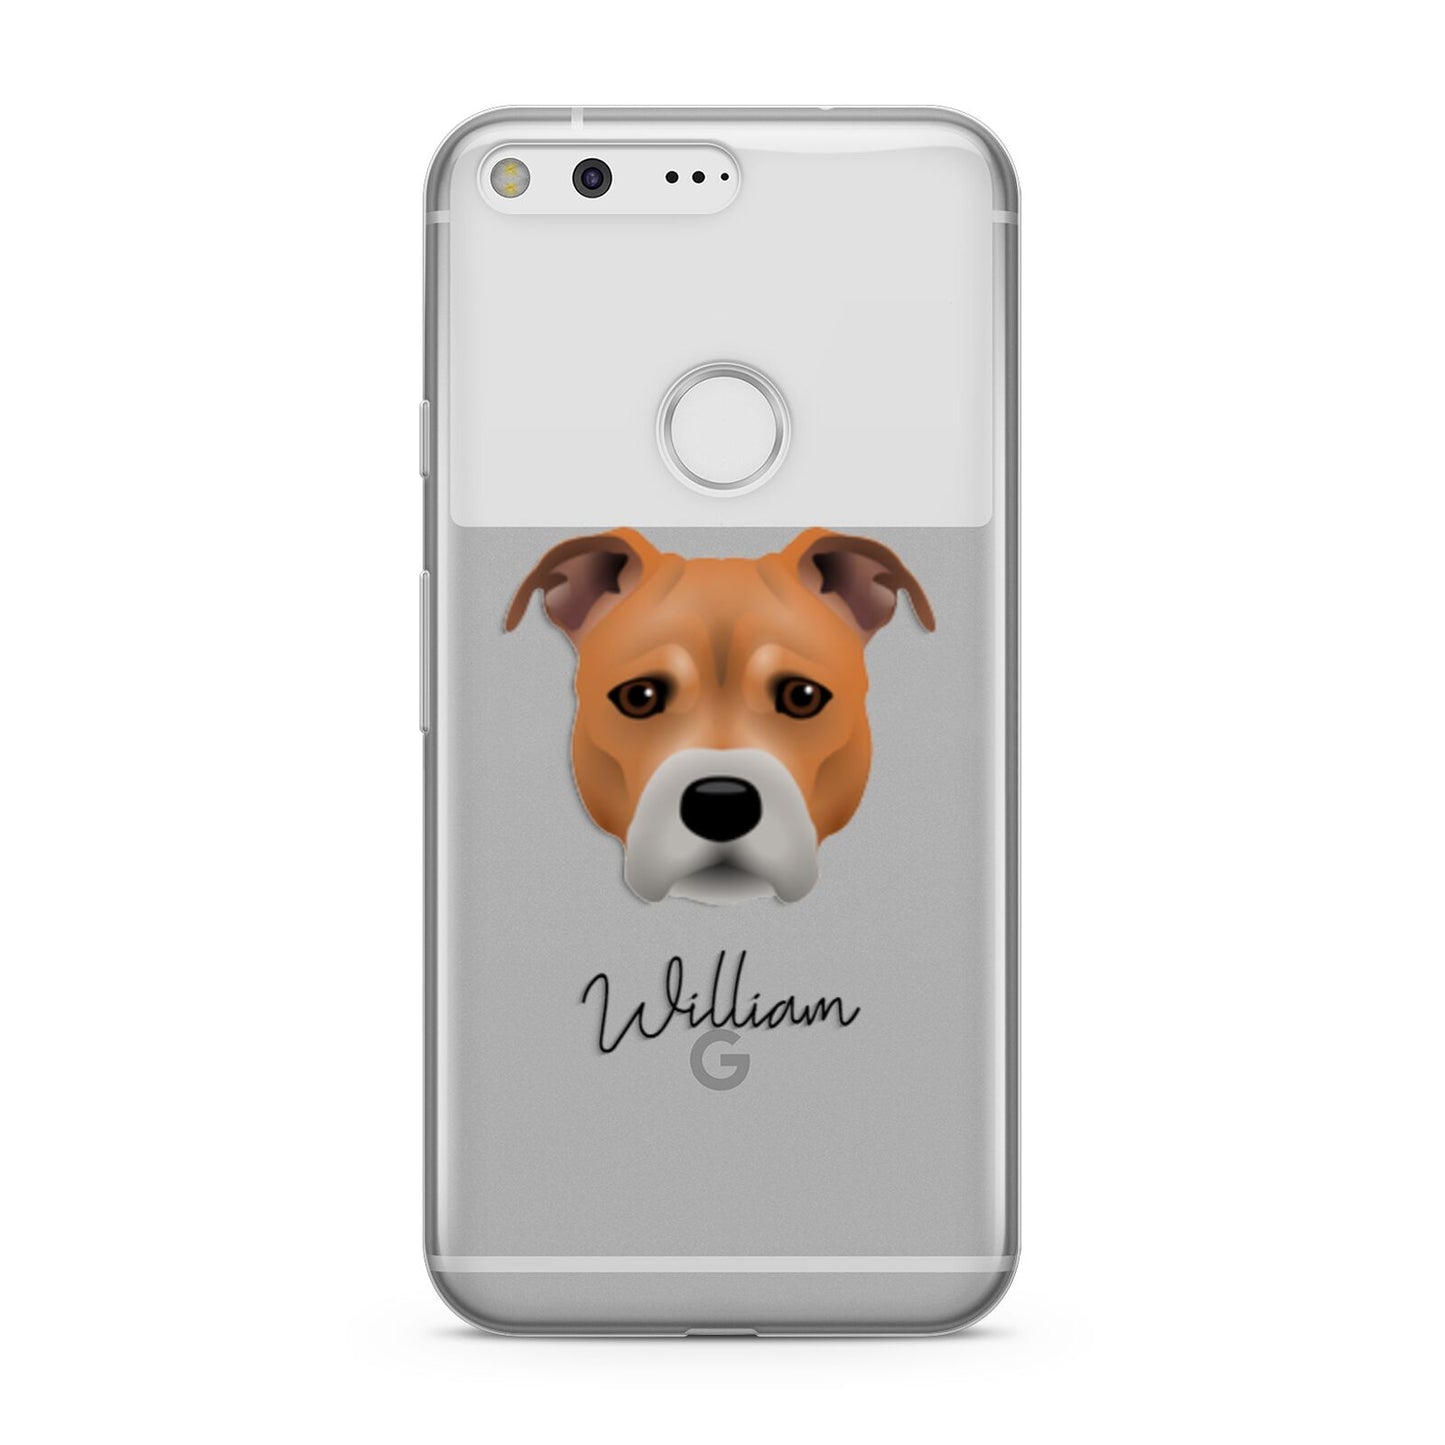 Staffordshire Bull Terrier Personalised Google Pixel Case